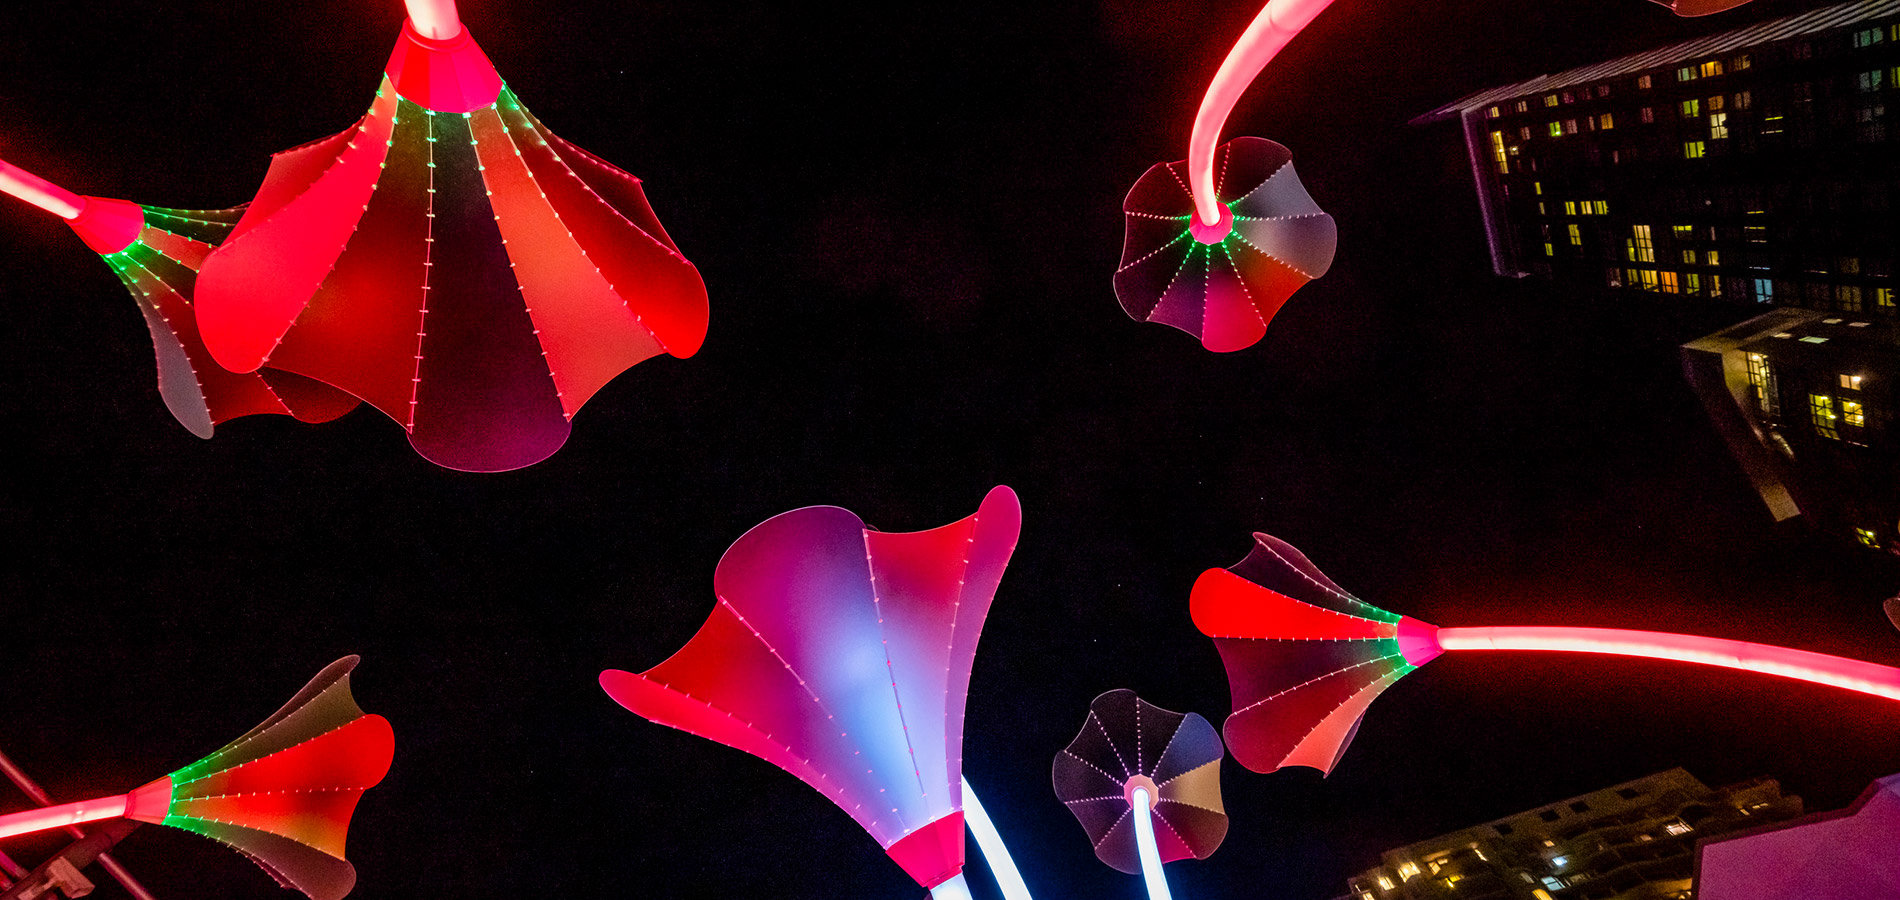 The Trumpet Flowers installation in the Chatswood precinct during Vivid Sydney 2019.